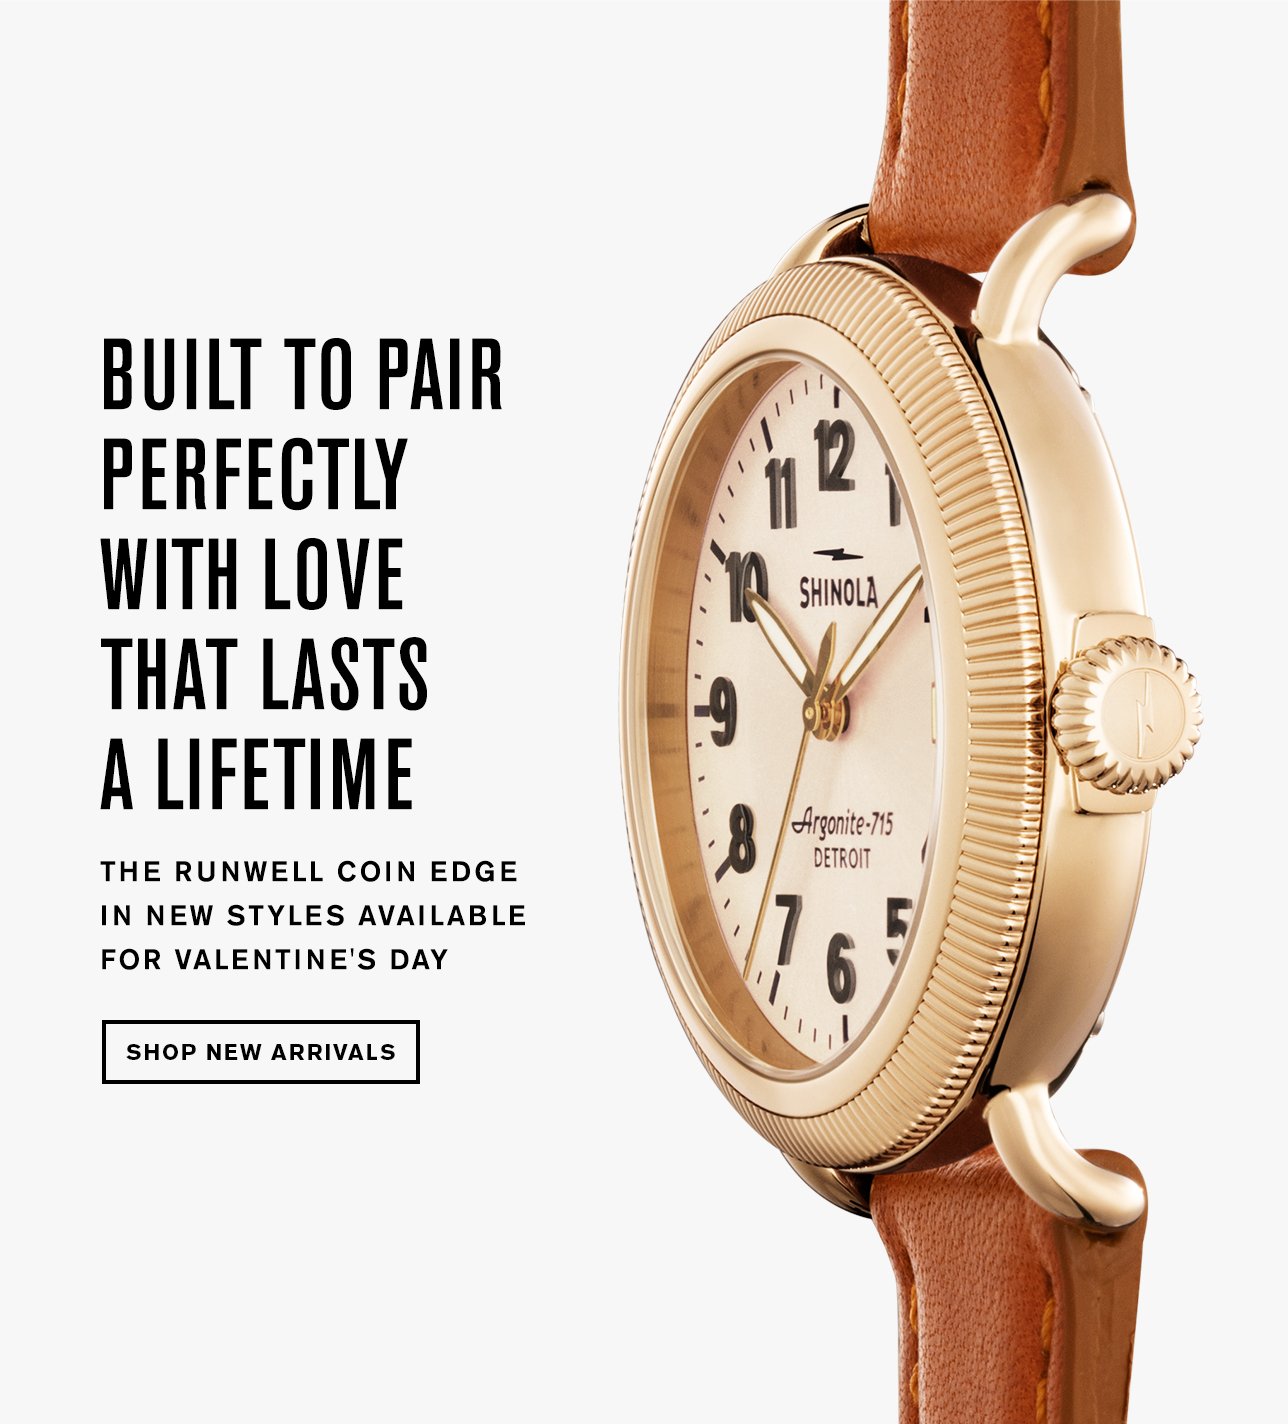 Shinola Detroit: New Watch Styles Just In Time for Valentine's Day 